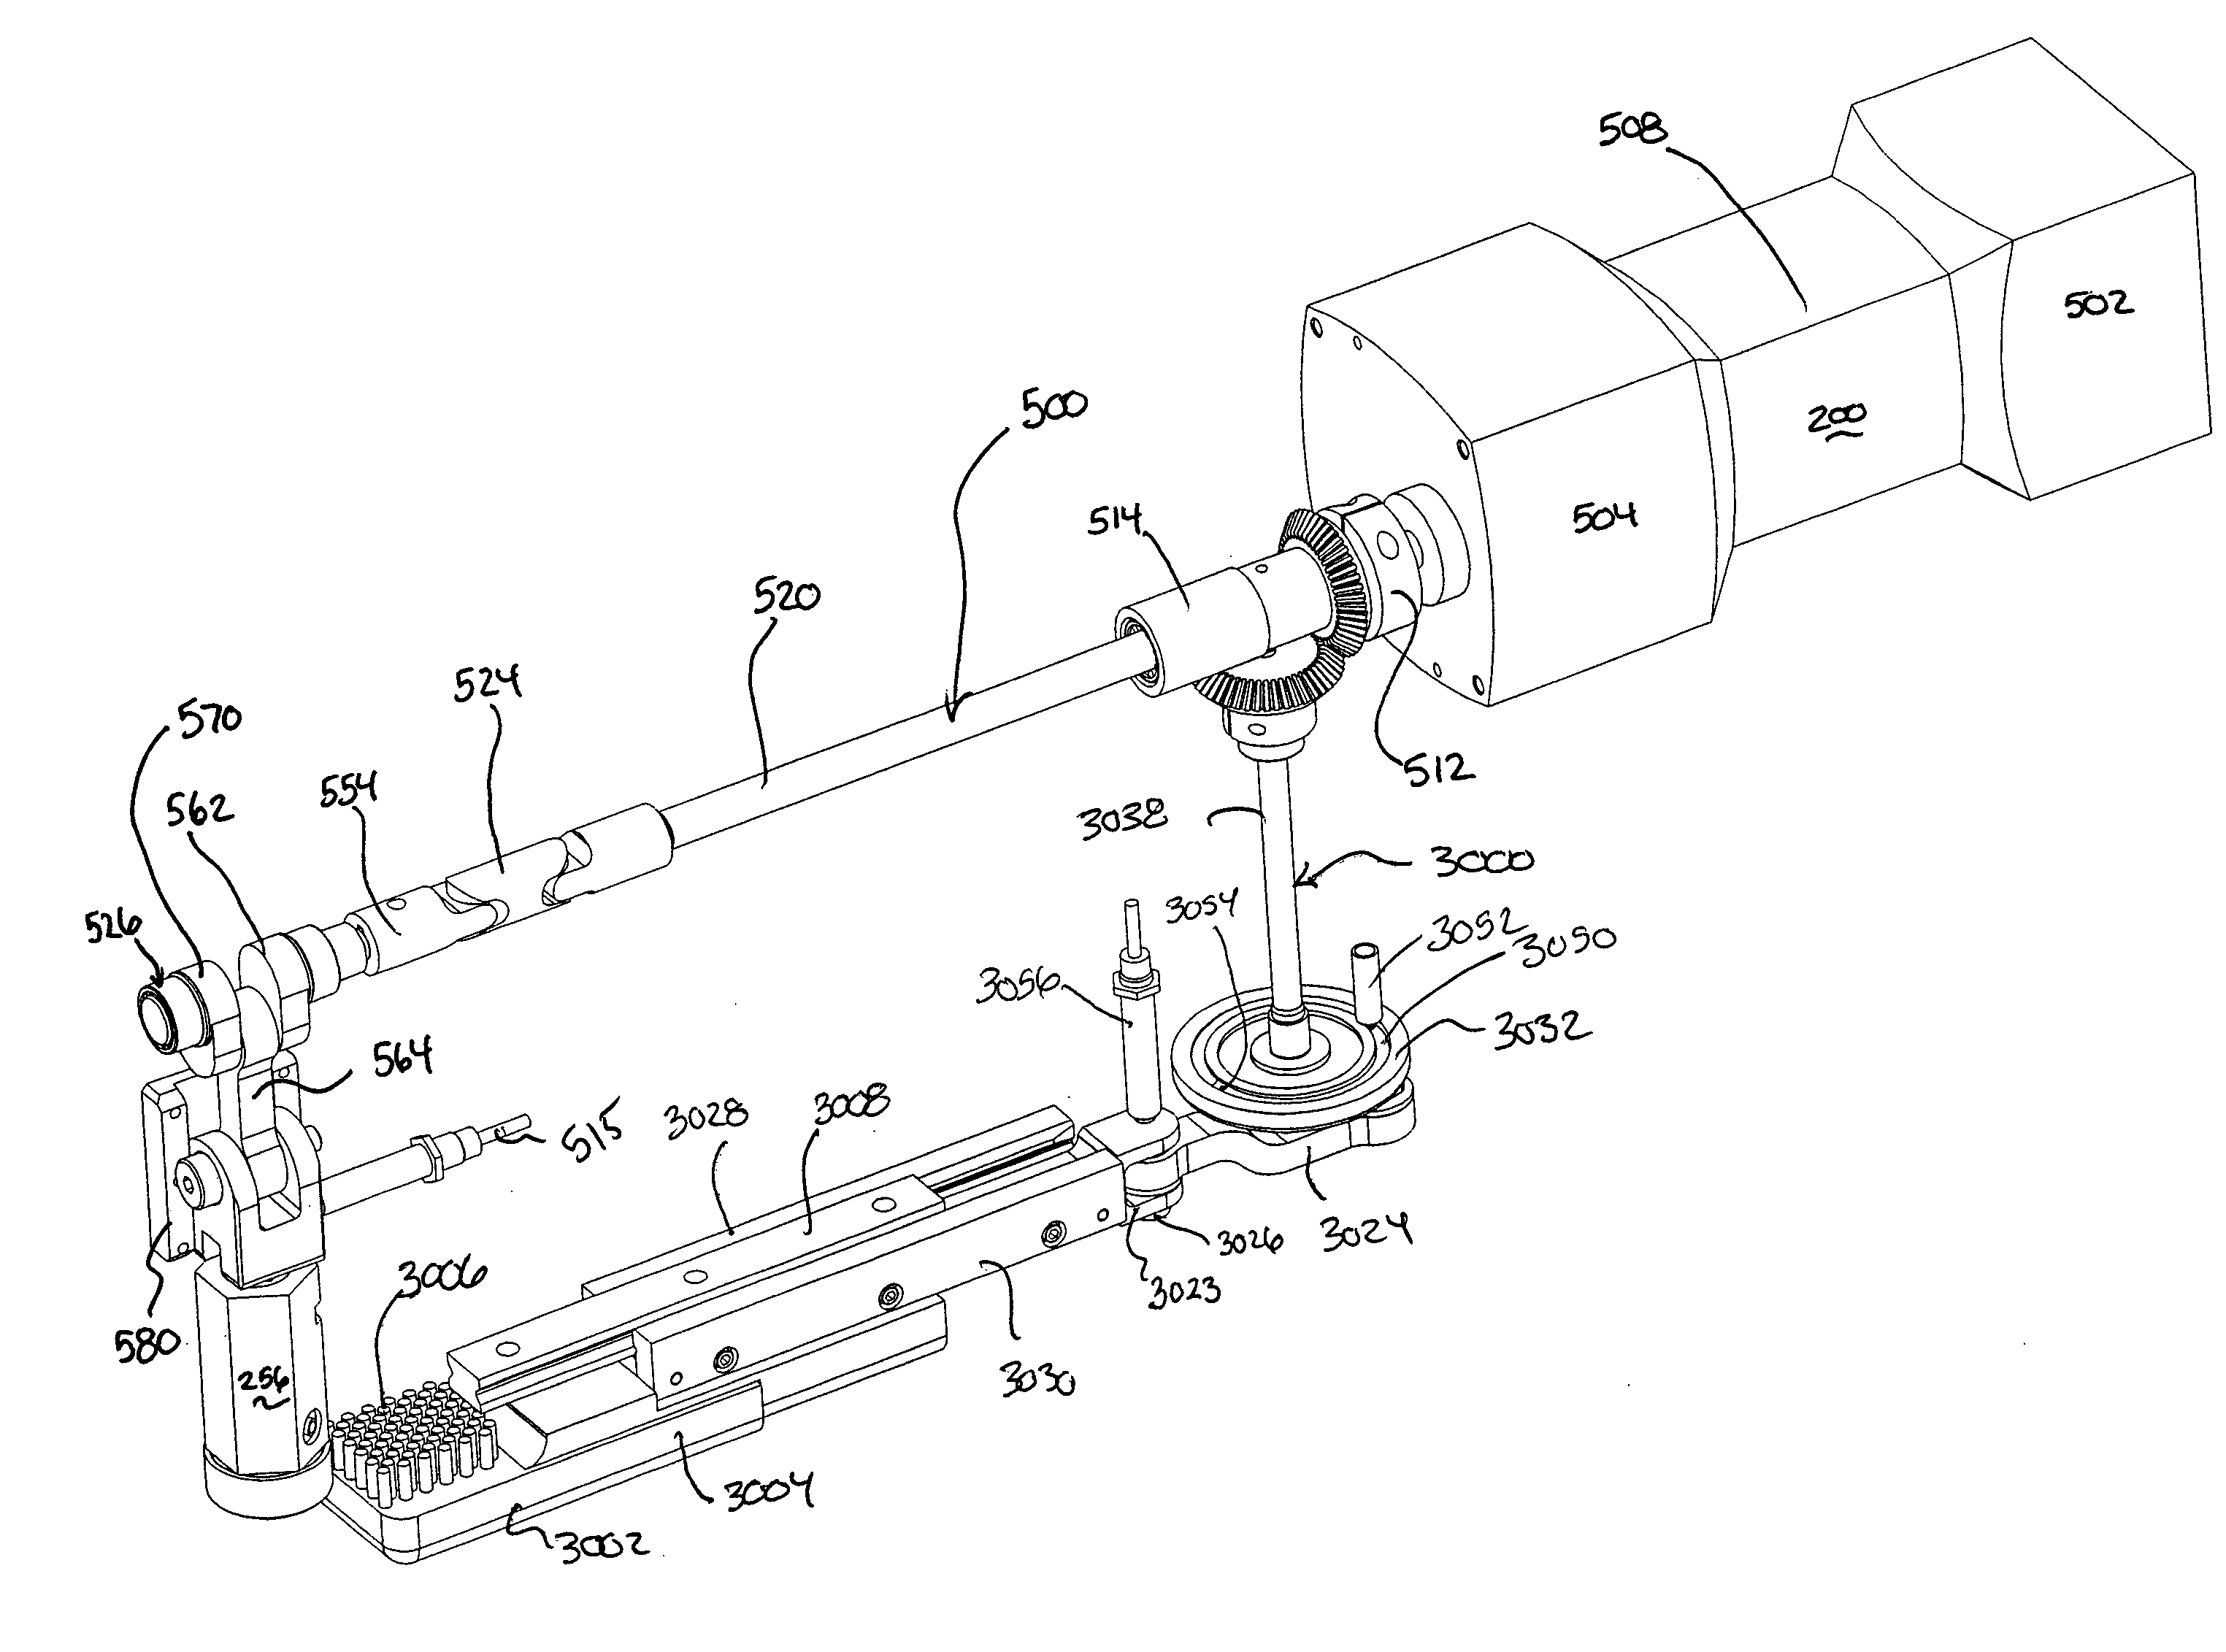 Dispensing system and method of manufacturing and using same with a dispenser tip management